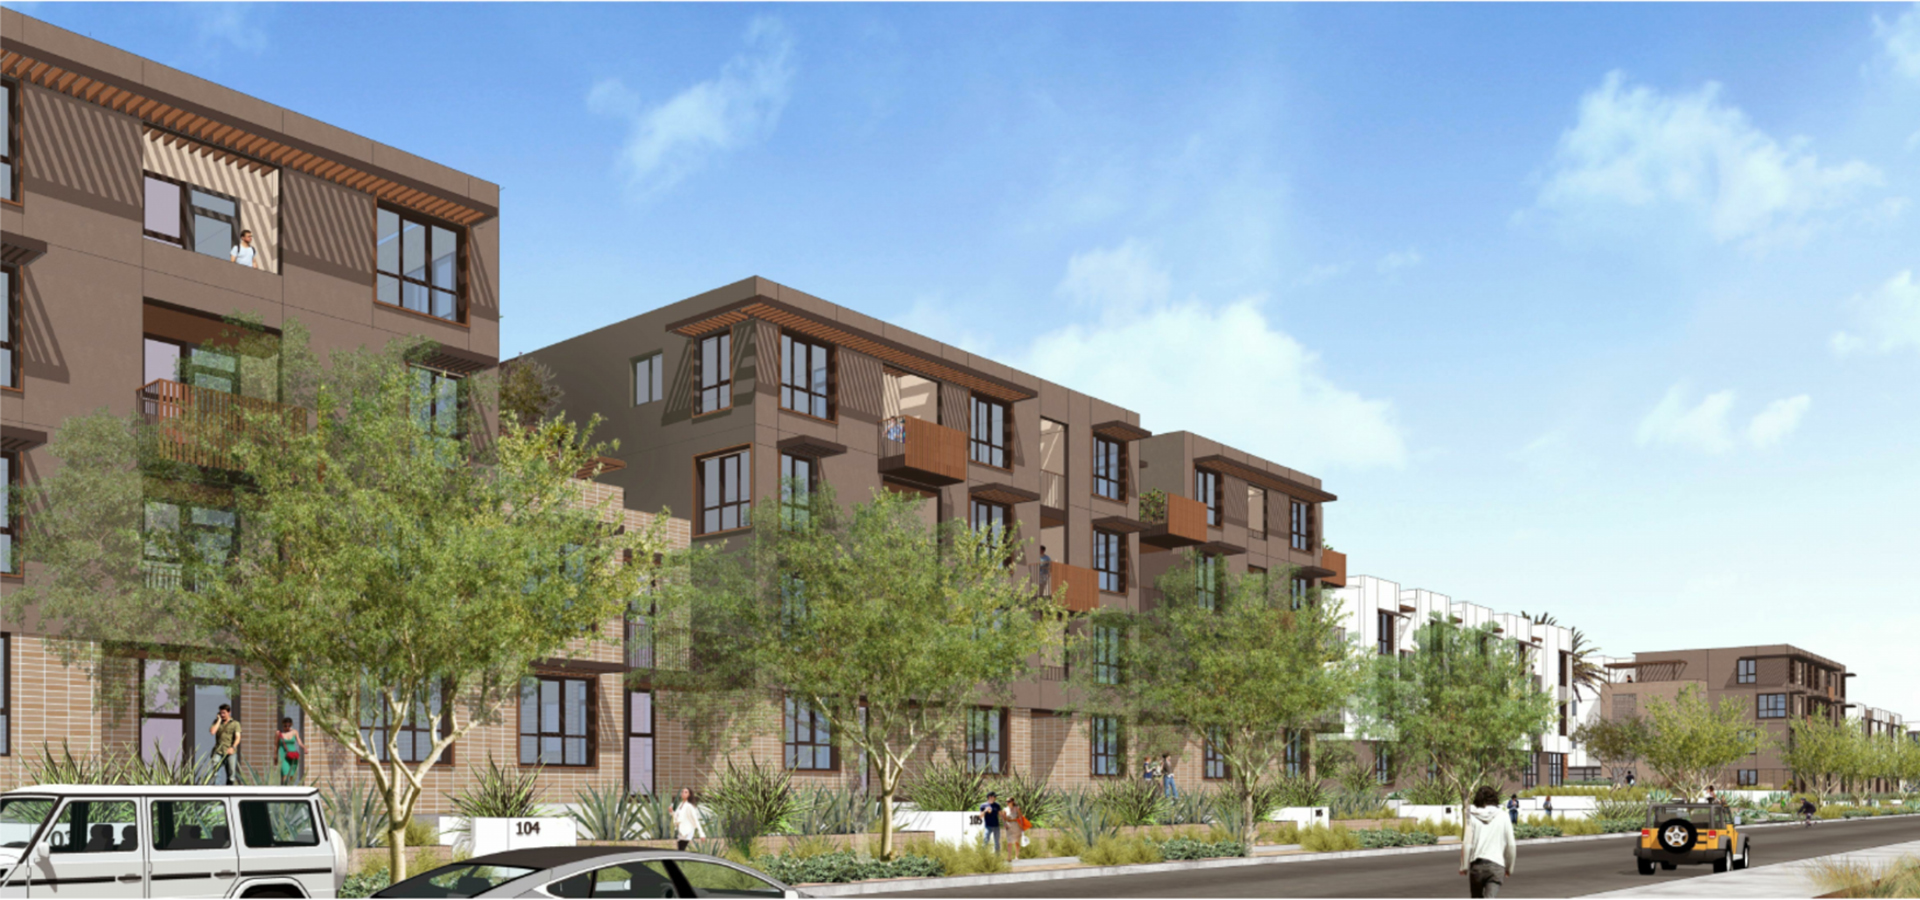 McShane to Build 260 Units in Scottsdale